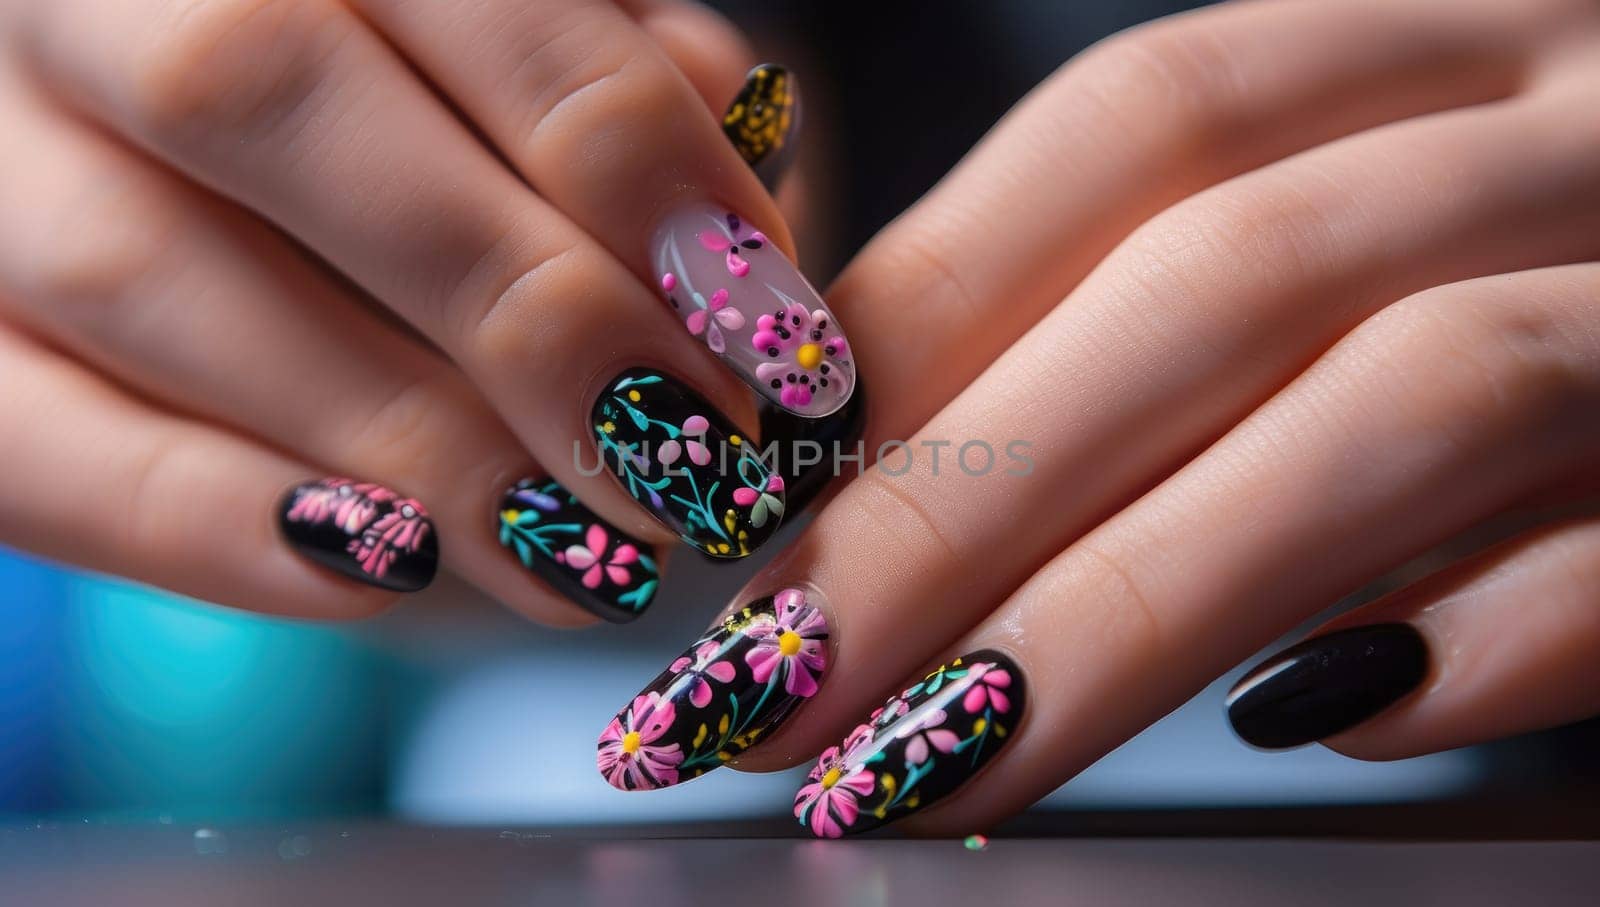 Intricate Floral Nail Art on Female Hands by ailike